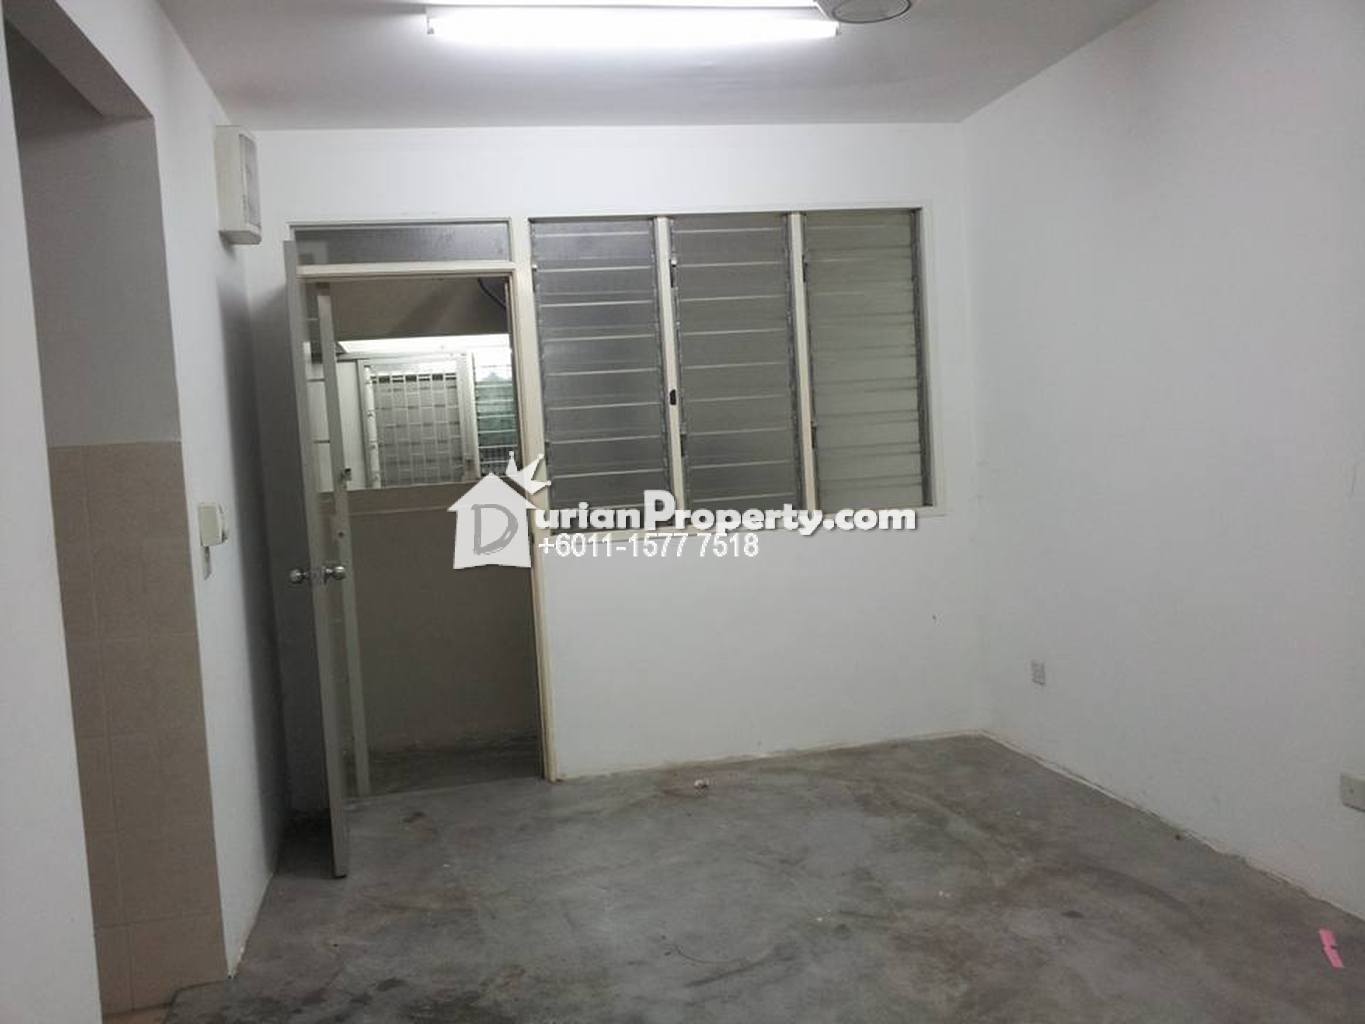 Apartment For Rent At Pangsapuri Seroja Section U13 For Rm 600 By Aaron Durianproperty